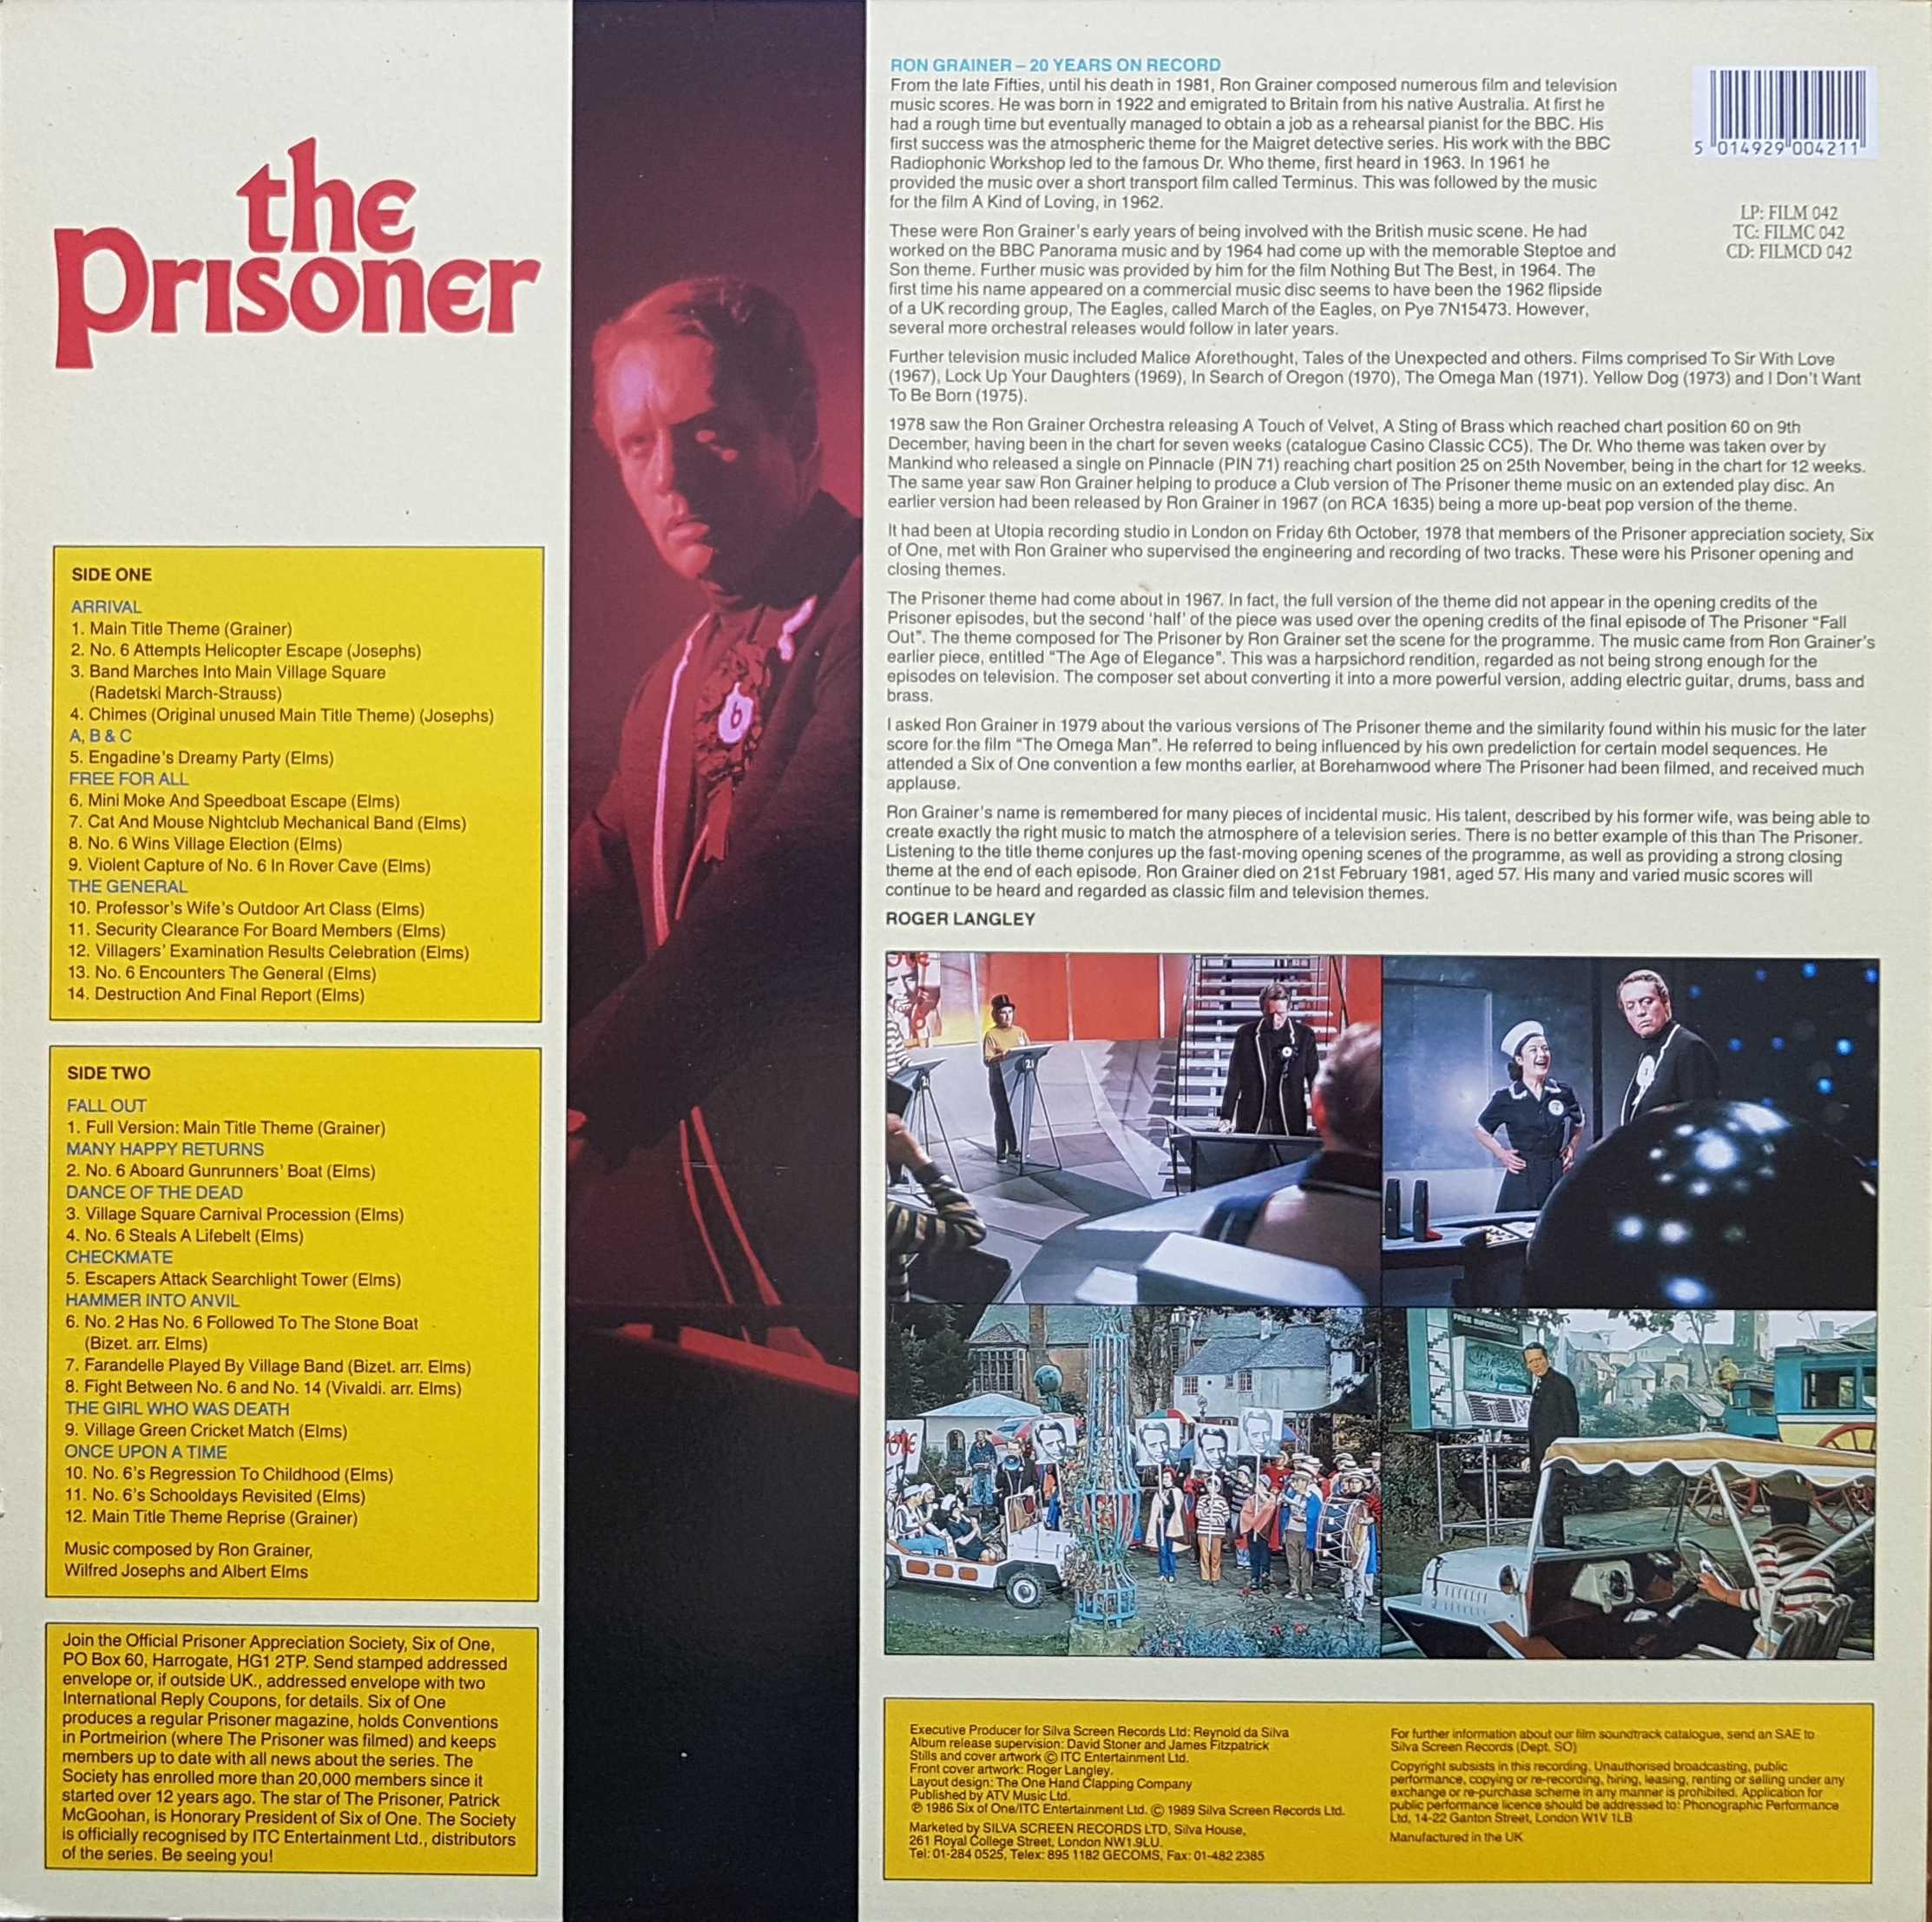 Picture of FILM 042 The prisoner by artist Various from ITV, Channel 4 and Channel 5 library